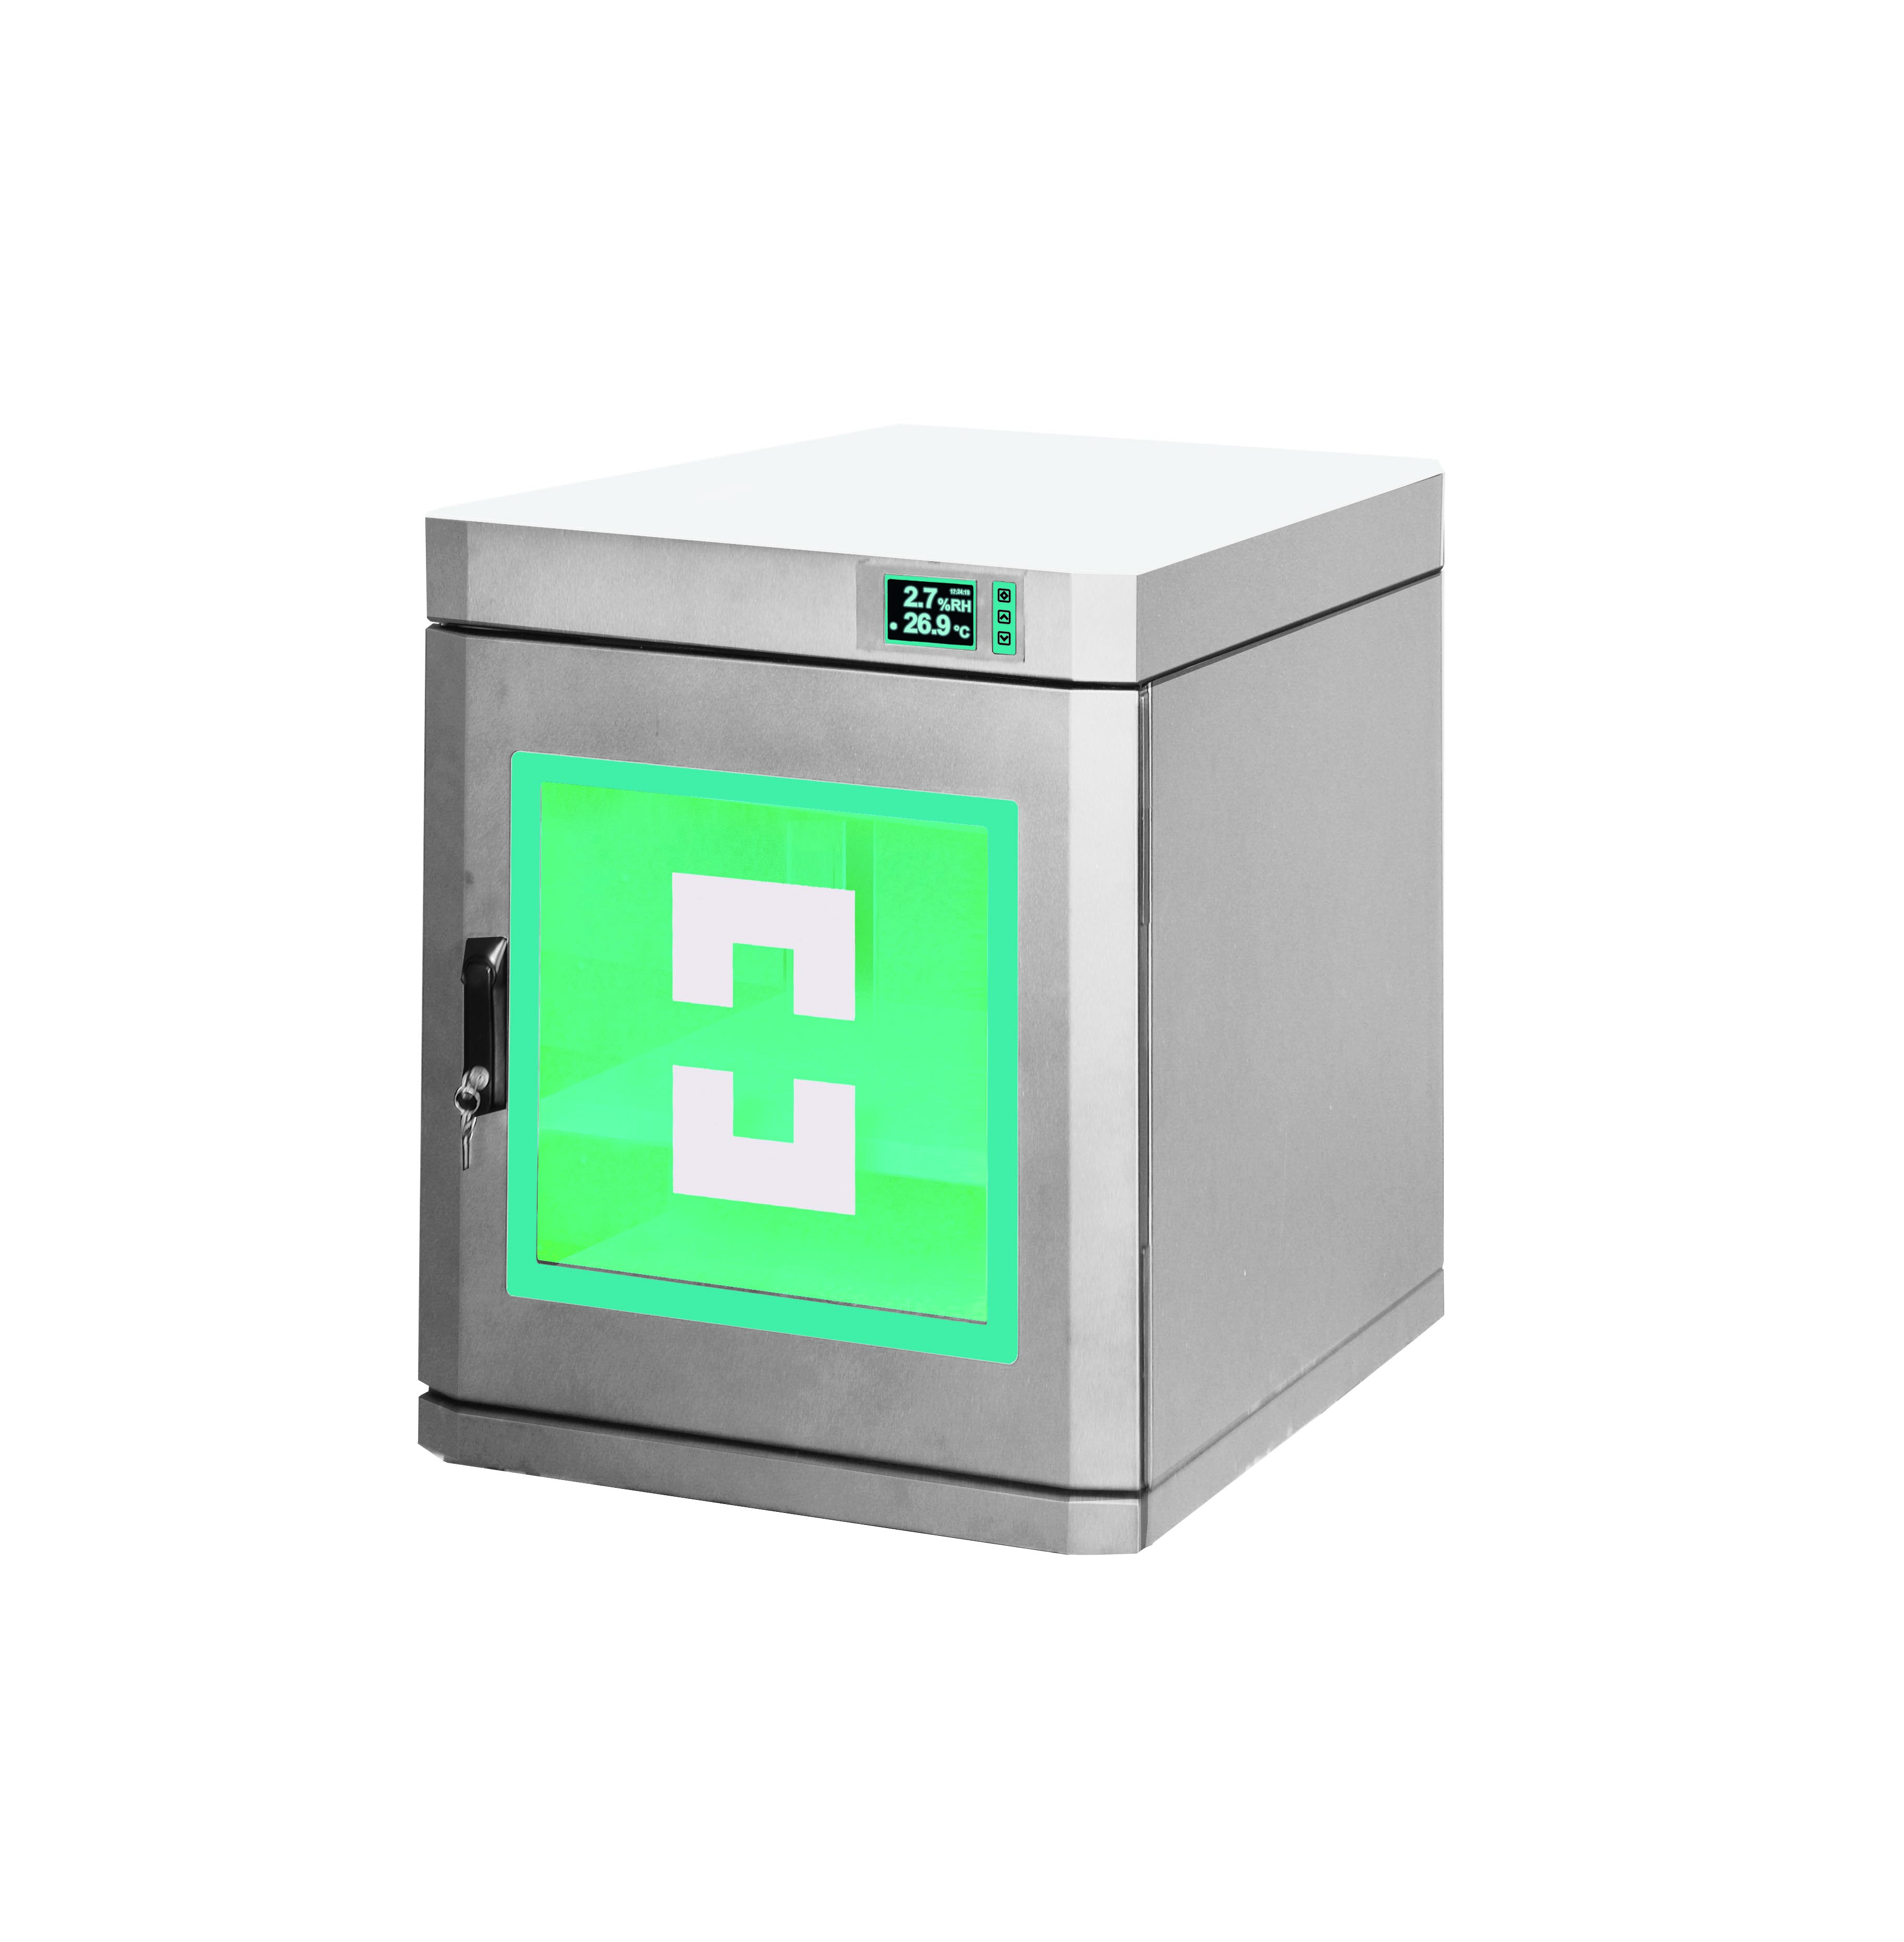 Dc 1 Esd Series Small Desktop Dry Cabinets